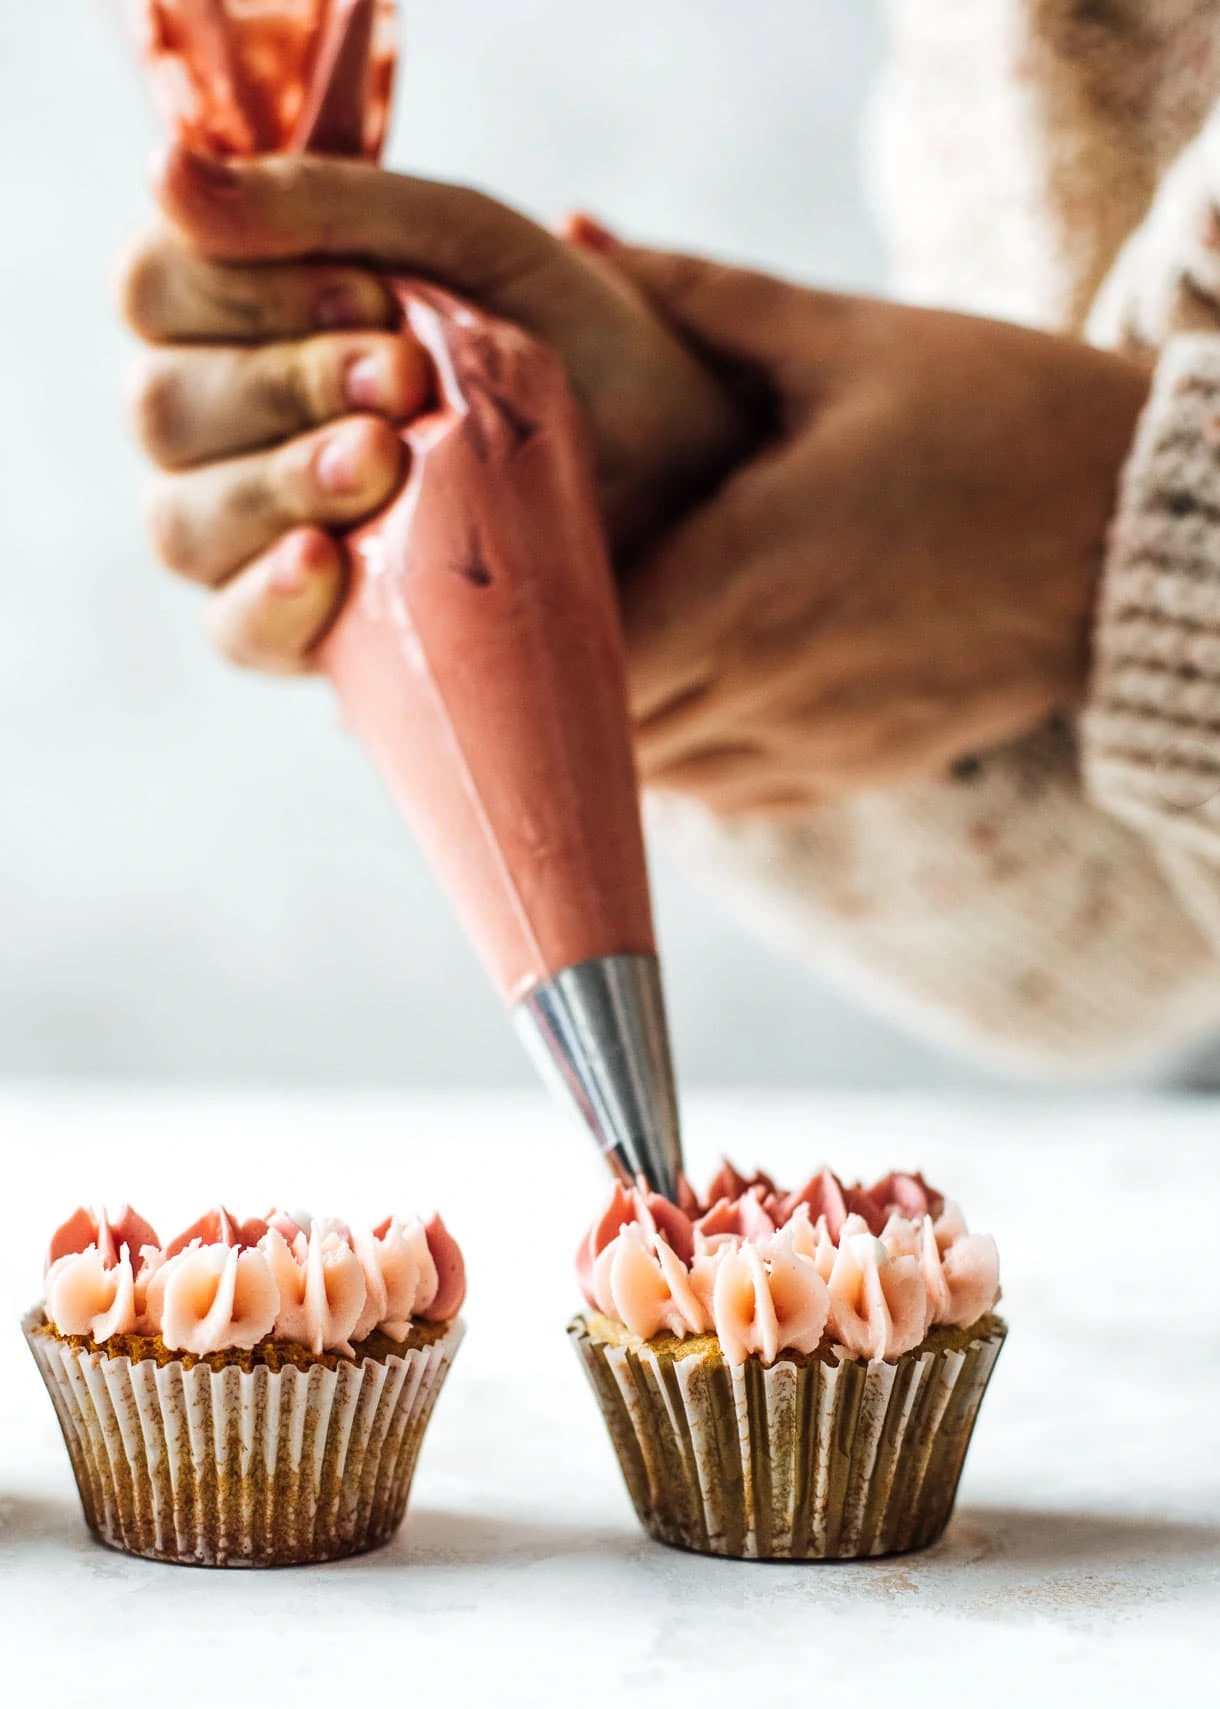 Piping pink frosting onto cupcakes using a #2 tip